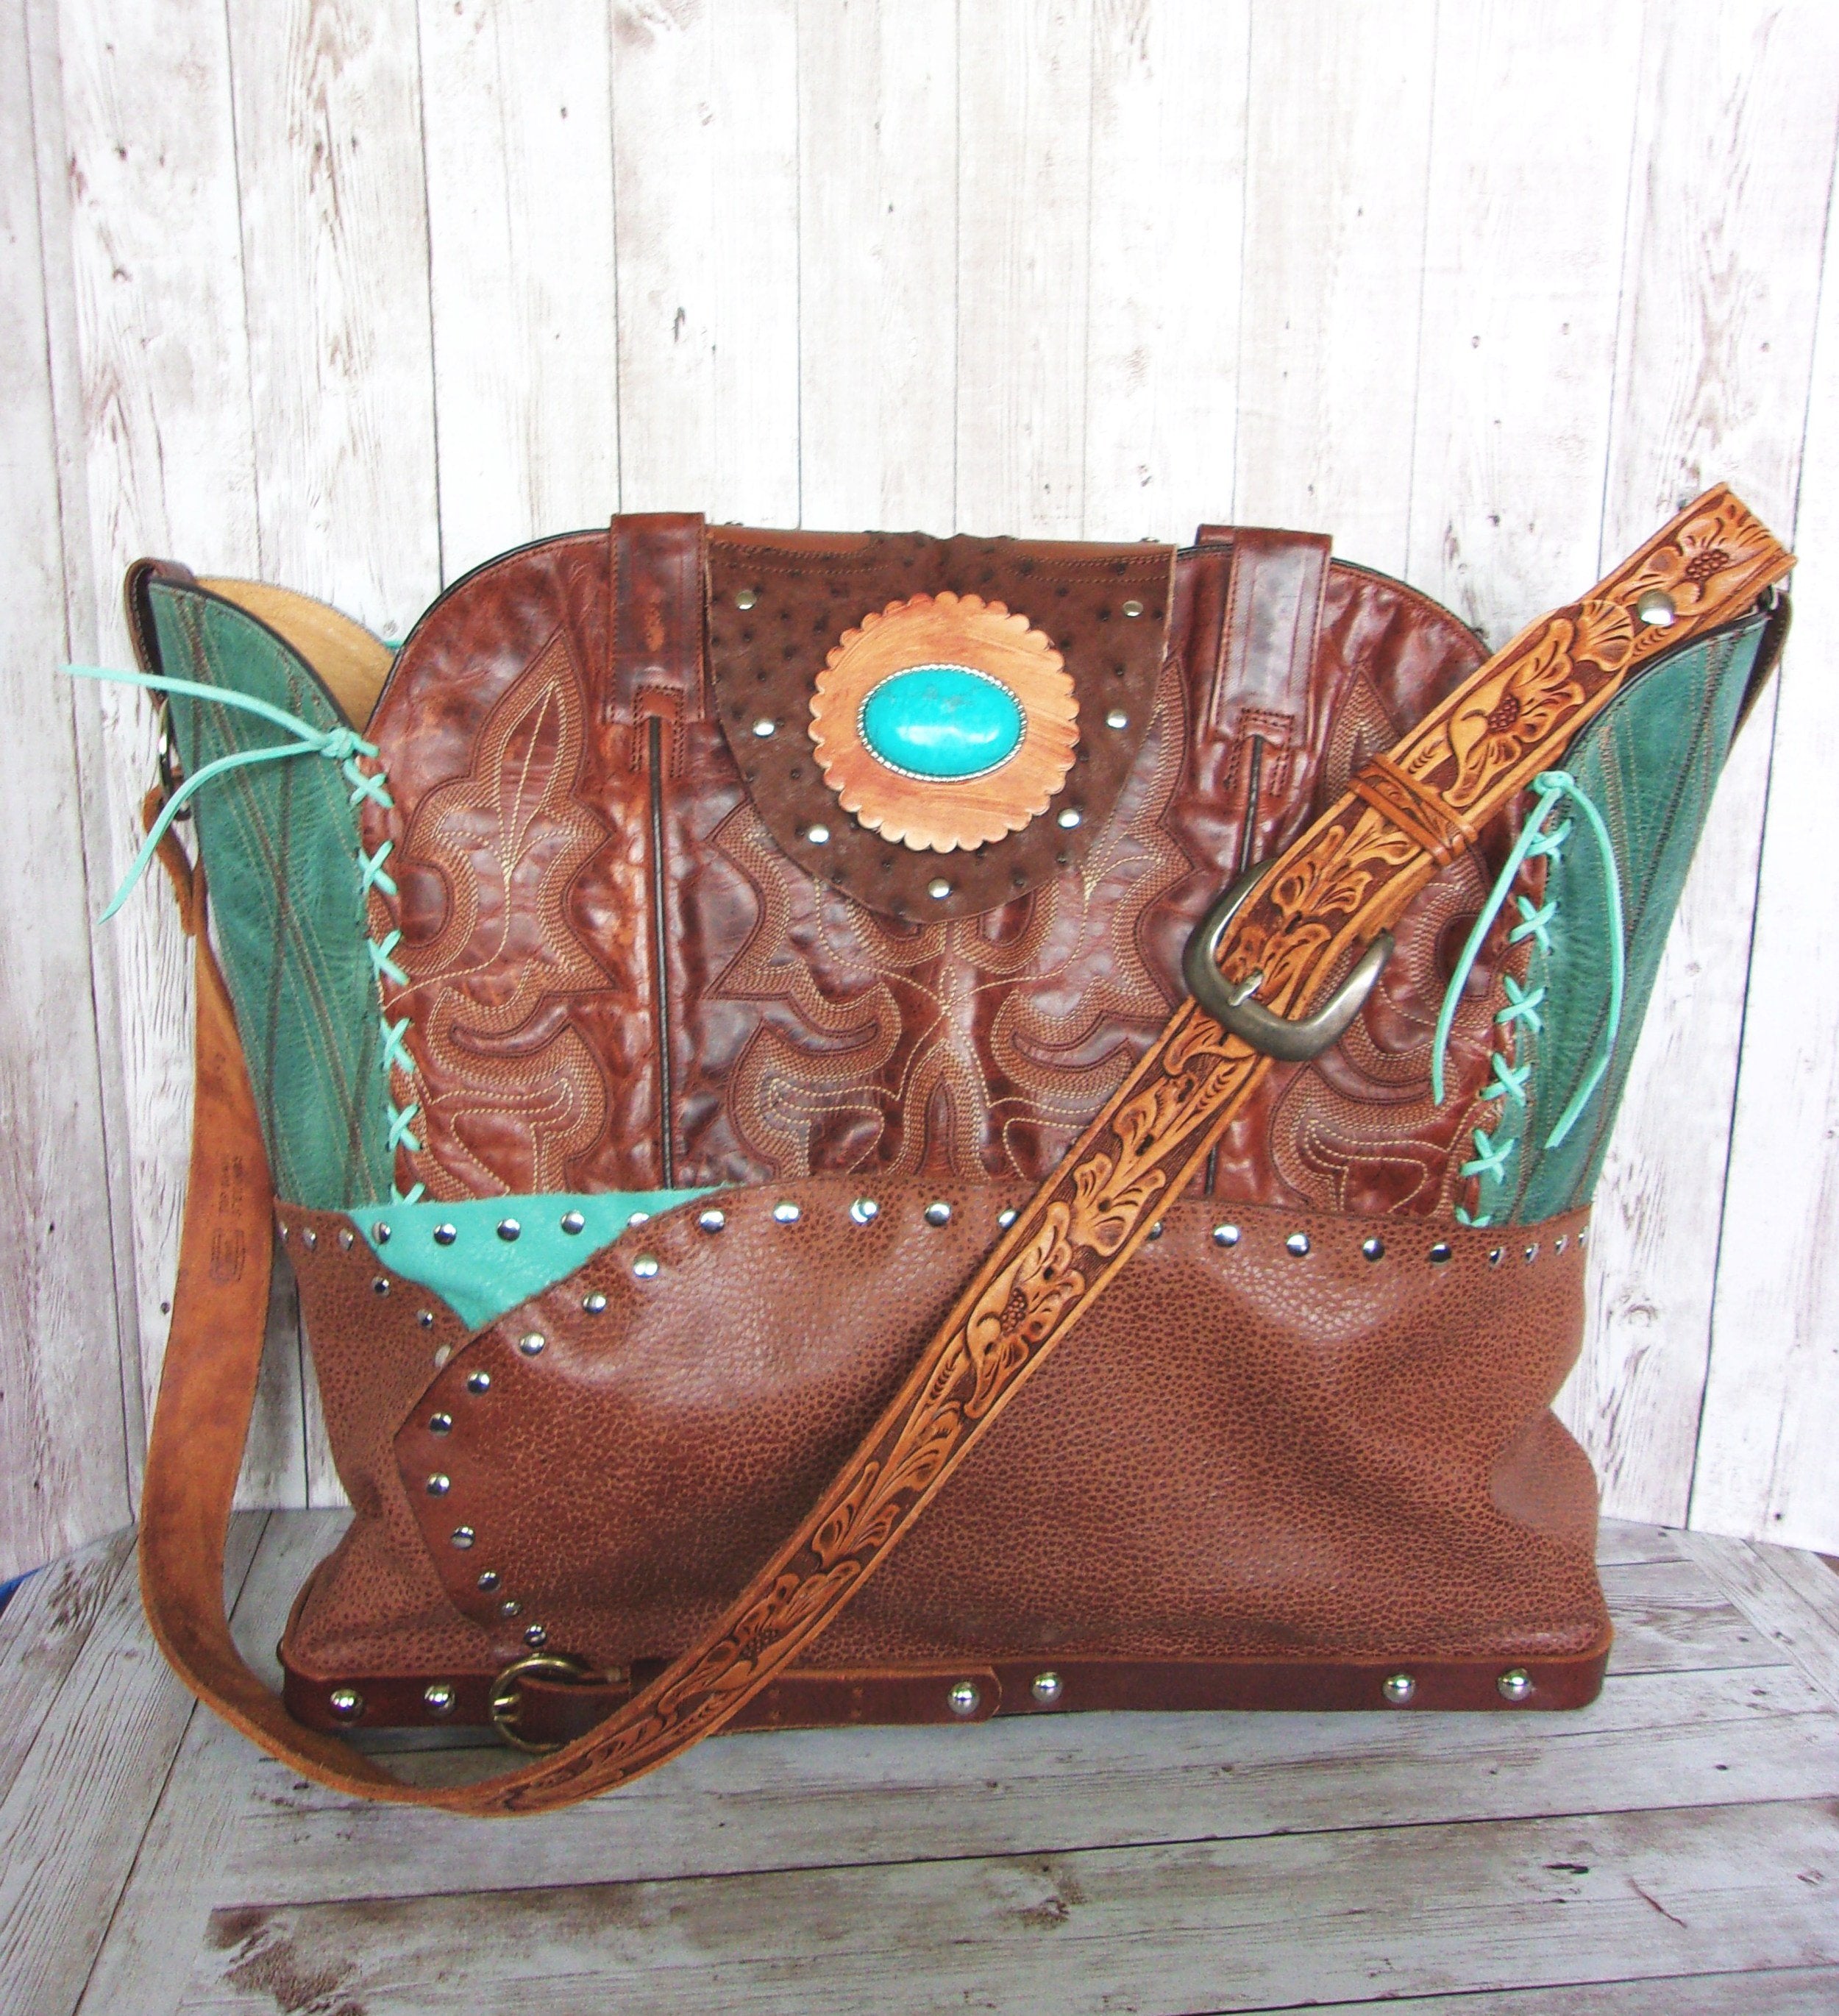 Western Laptop Tote - Extra Large Cowboy Boot Purse - Western Travel Bag LT39 cowboy boot purses, western fringe purse, handmade leather purses, boot purse, handmade western purse, custom leather handbags Chris Thompson Bags